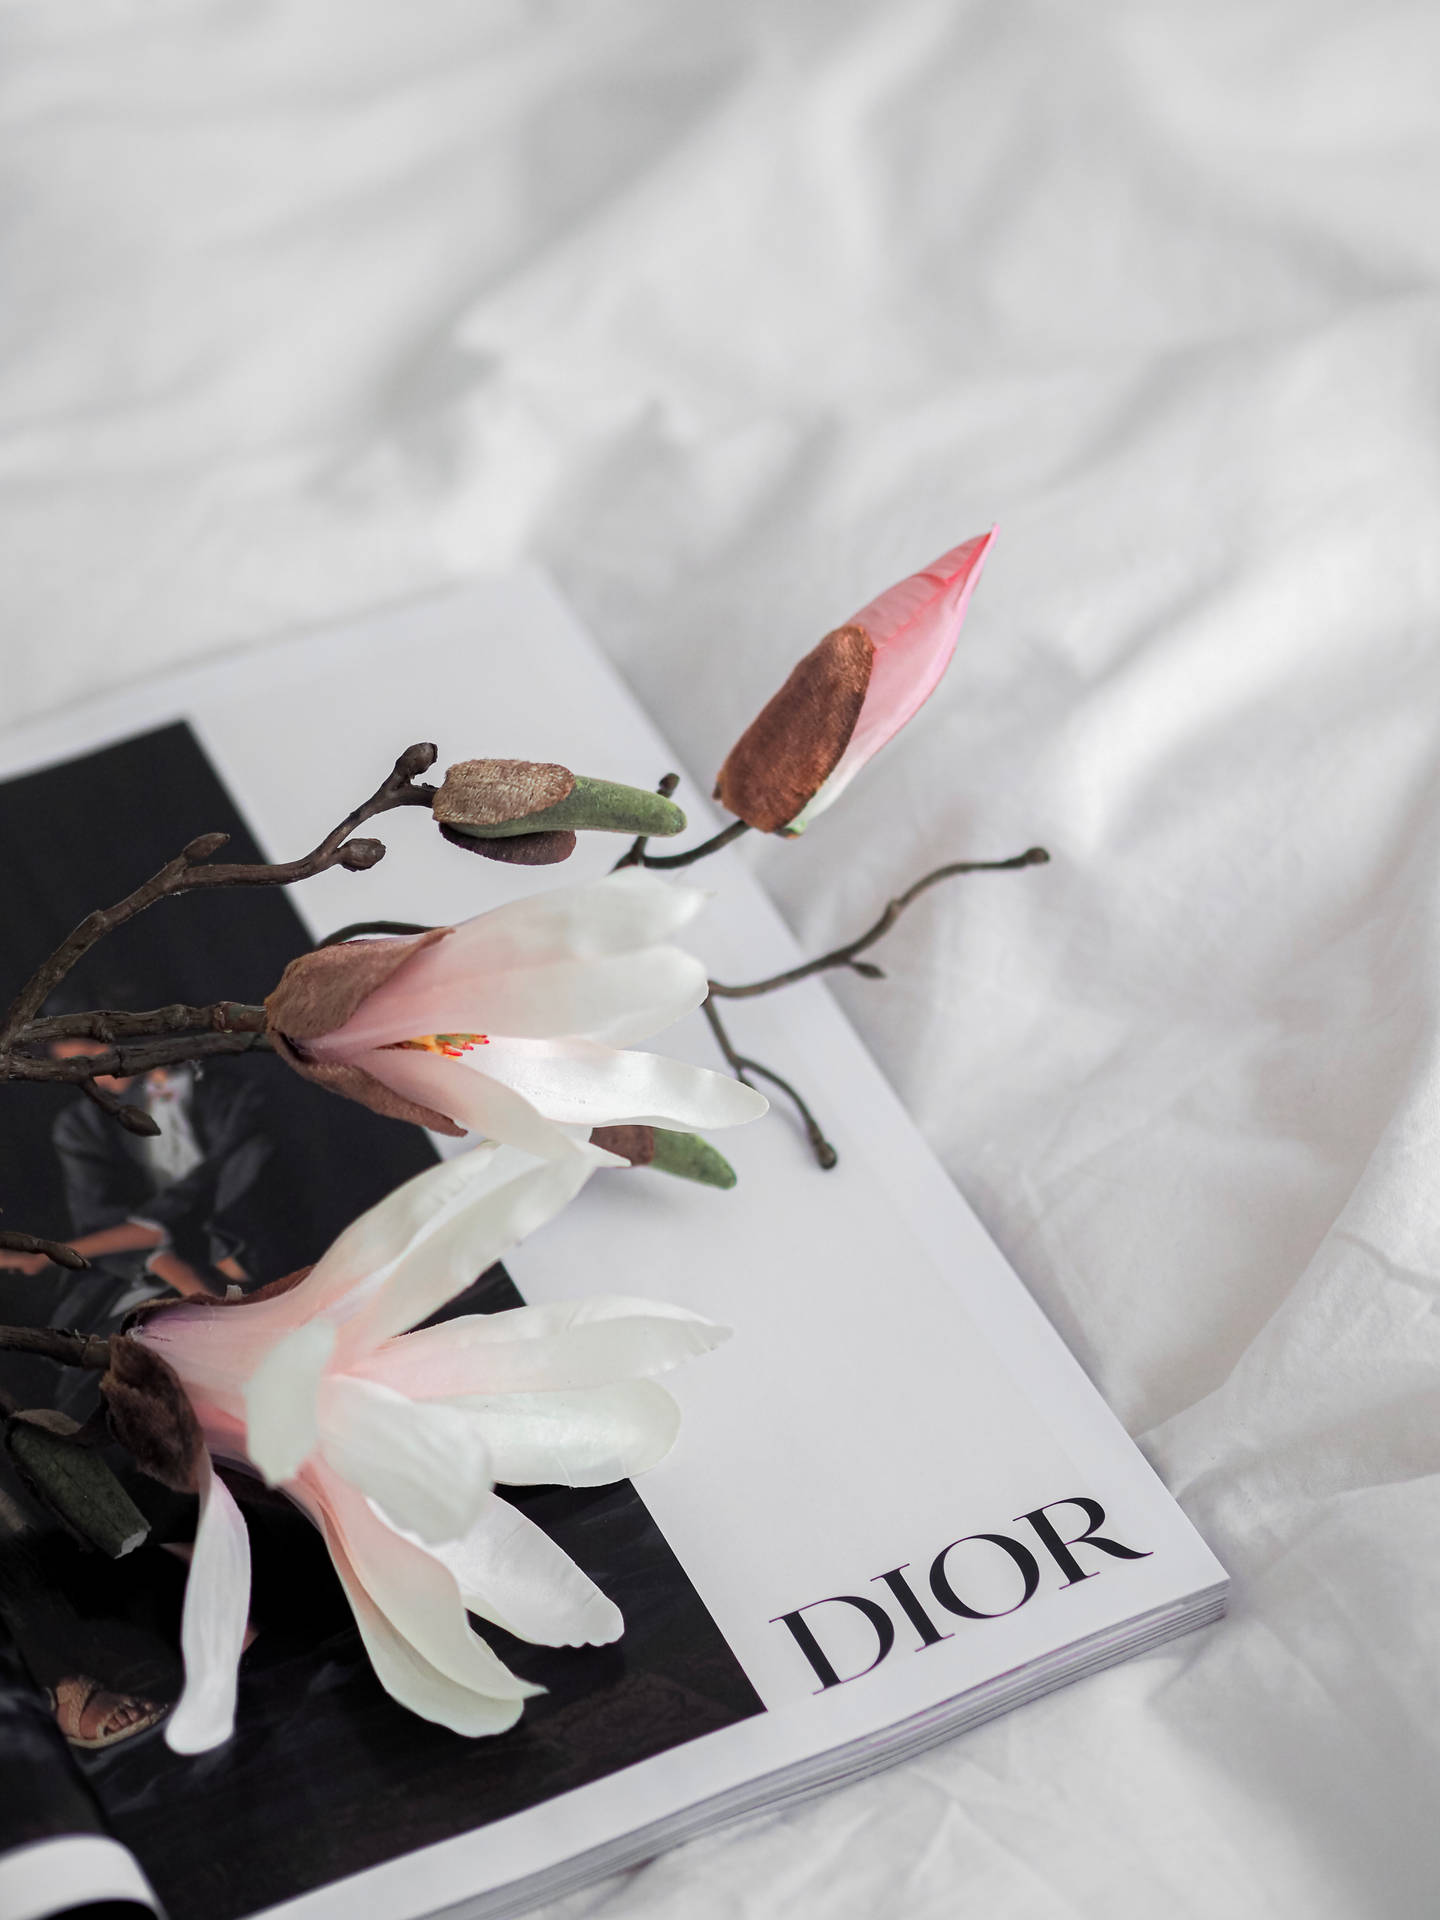 Dior 3456X4608 Wallpaper and Background Image